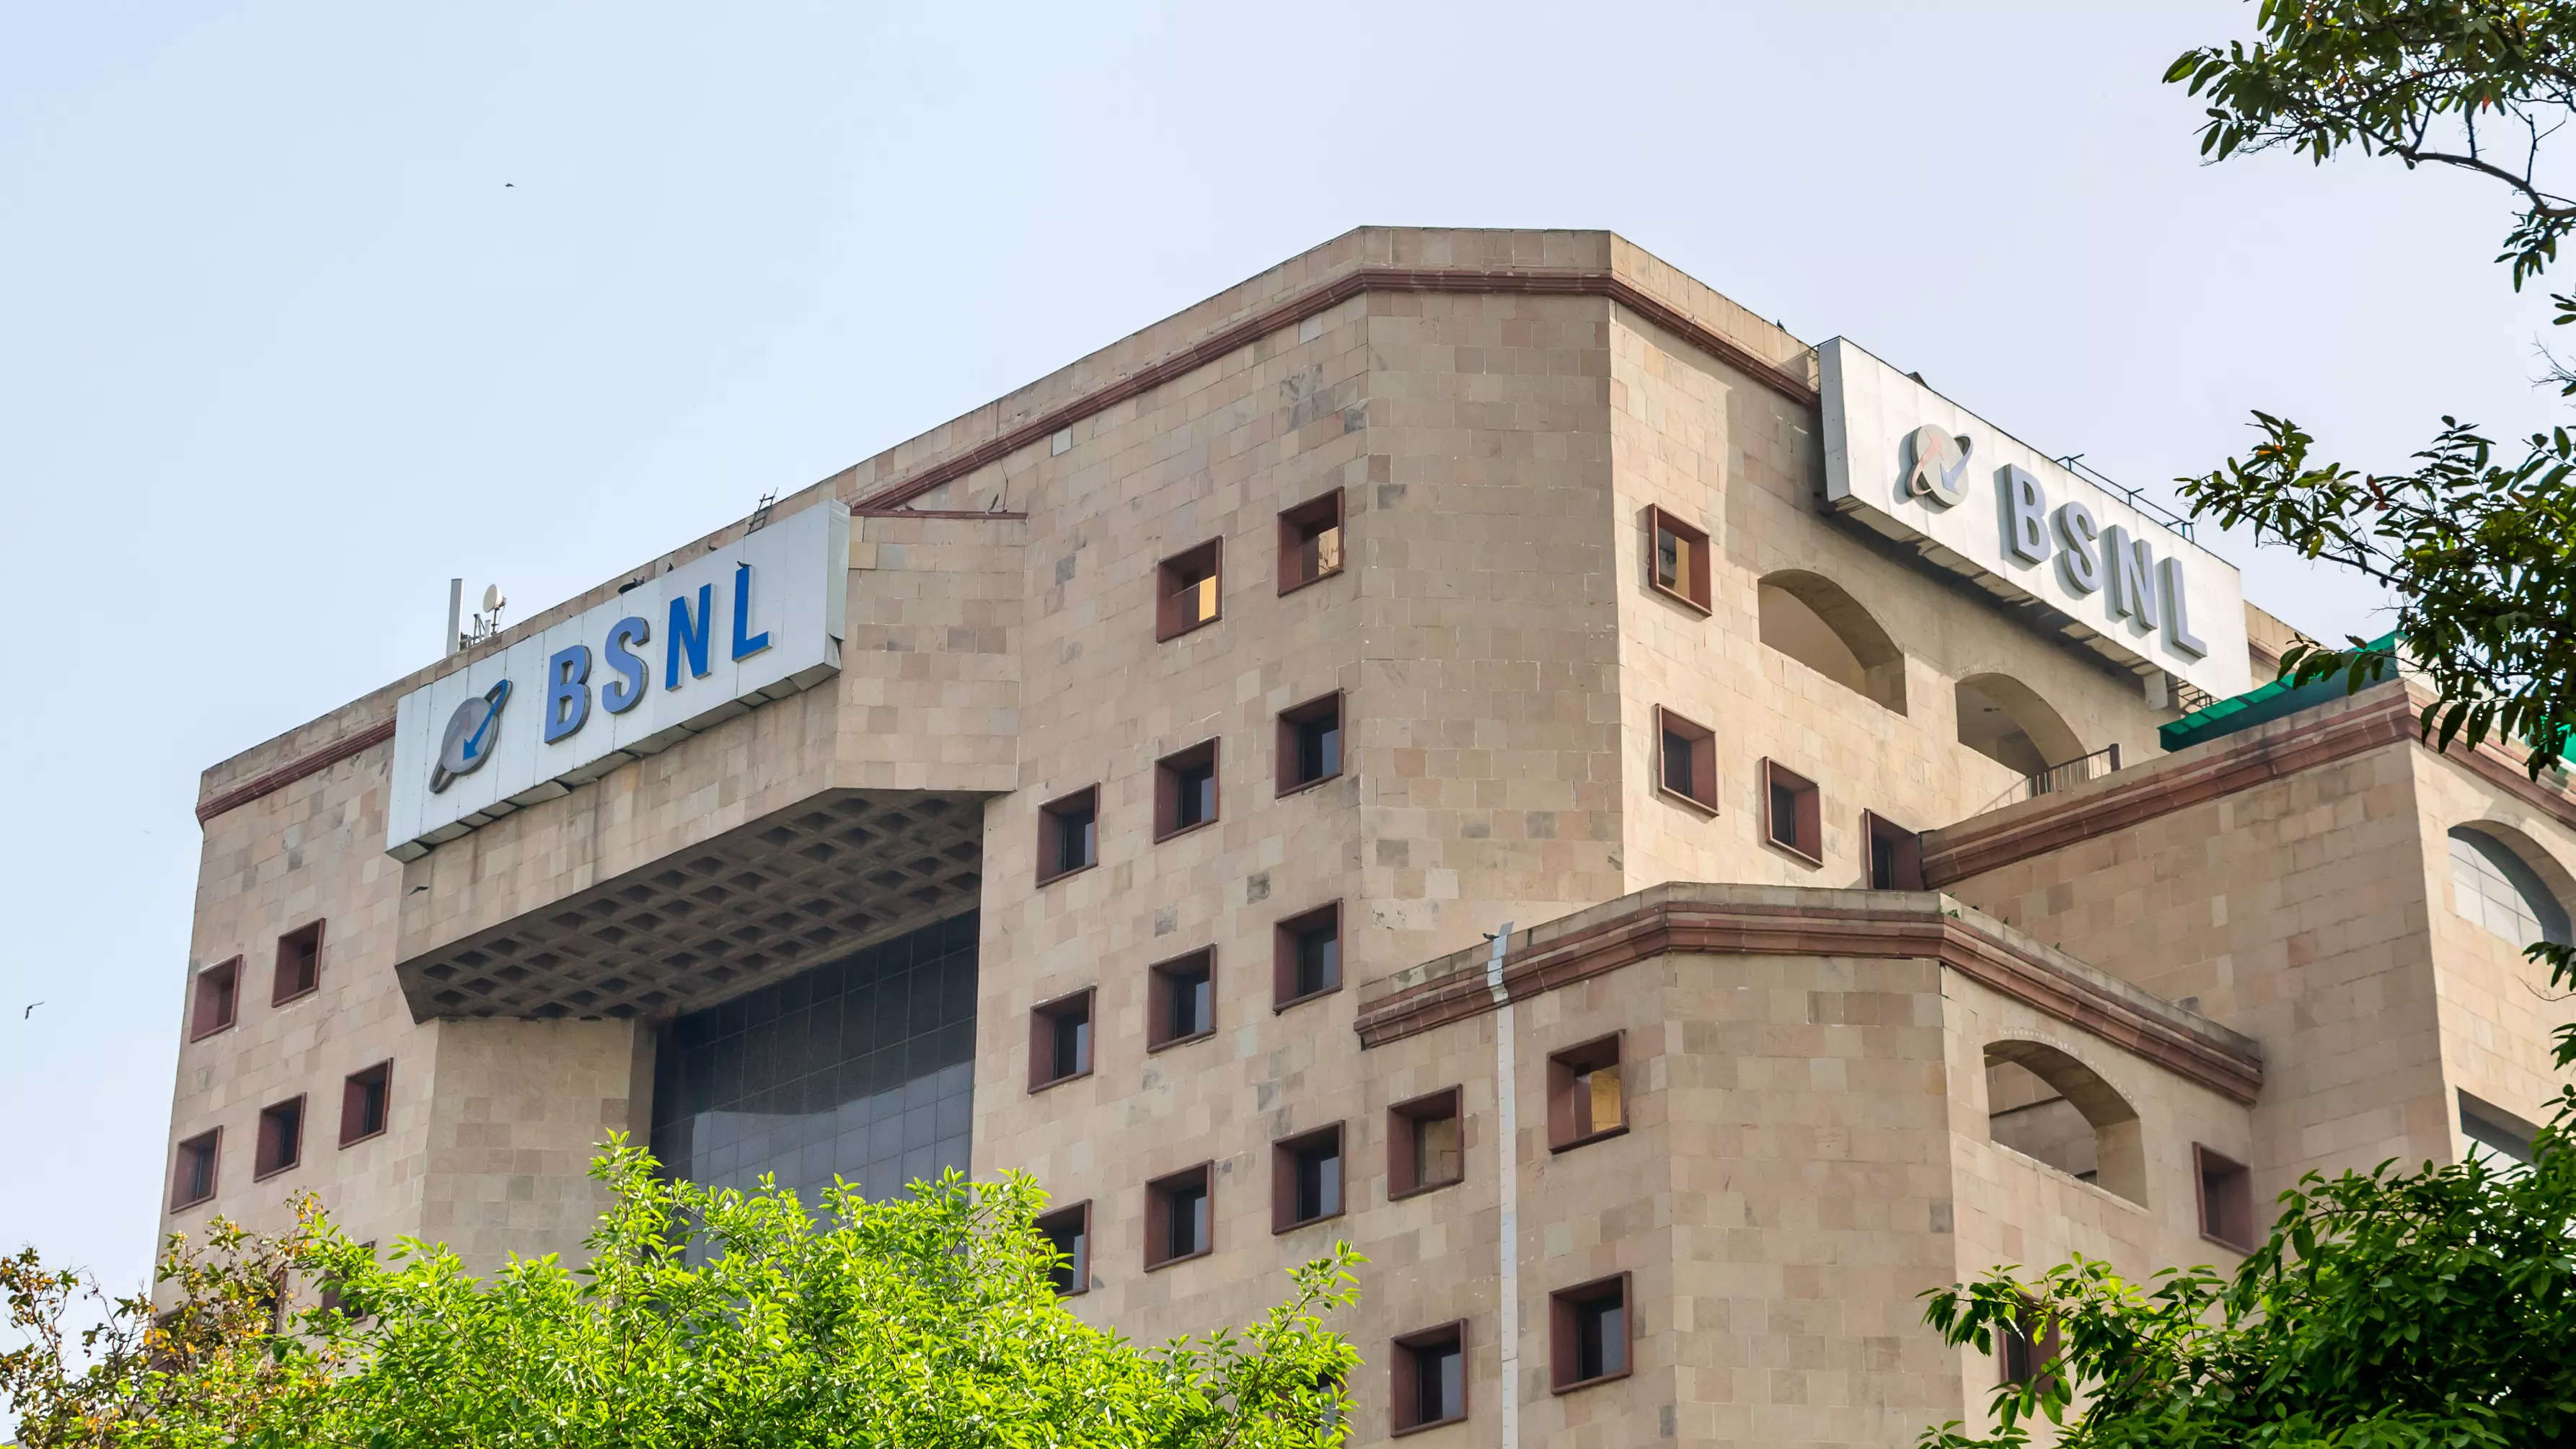 BSNL partners City Online Media to launch IPTV services for broadband customers: Report